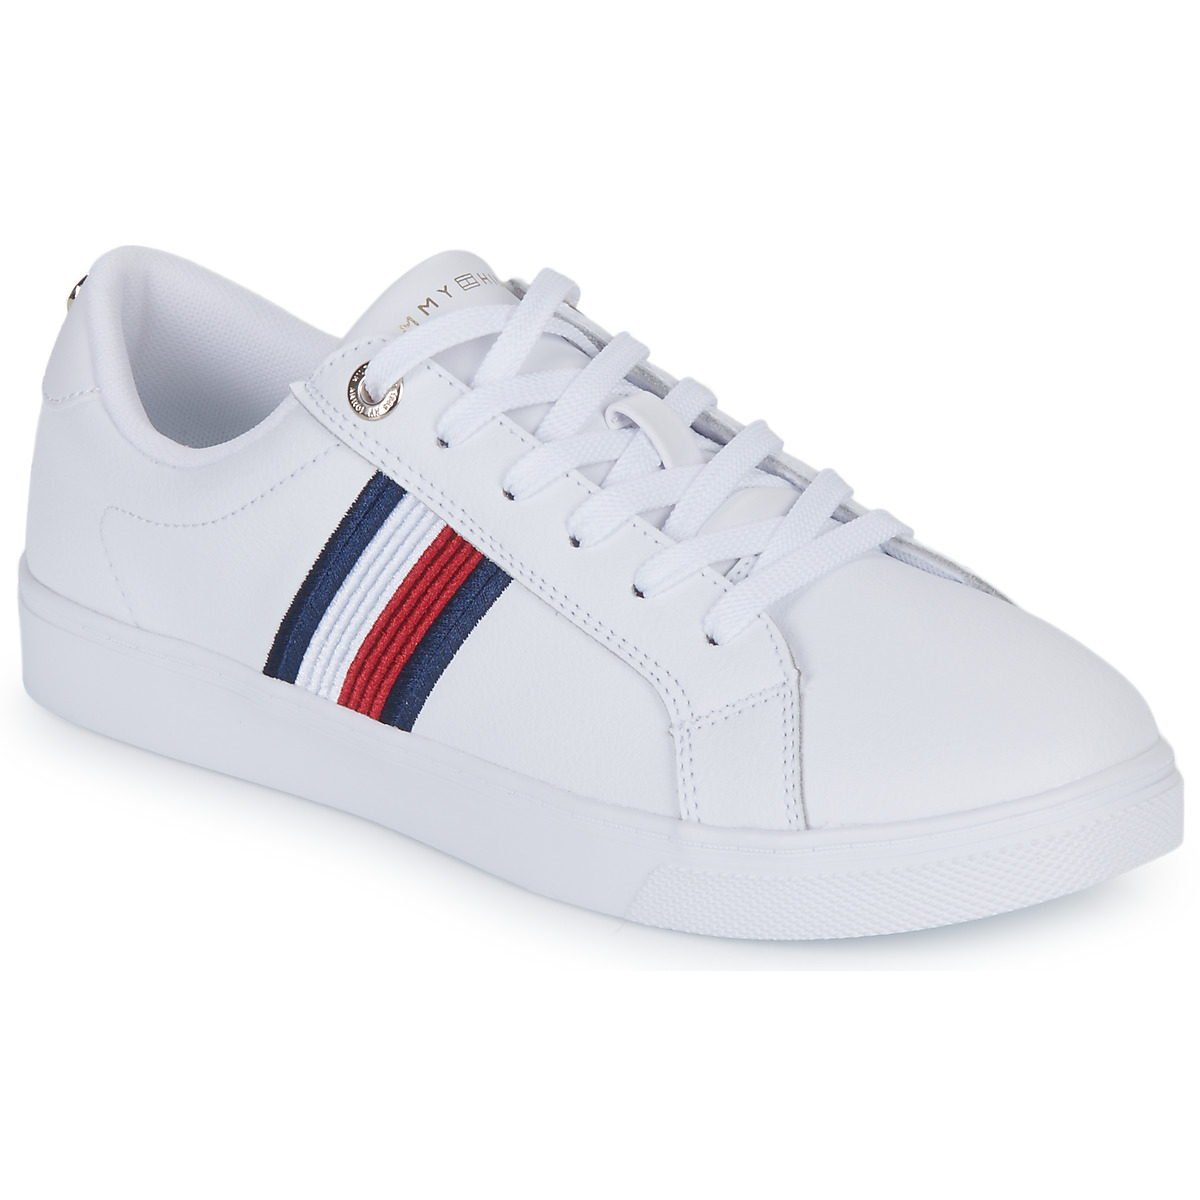 Chaussures Femme Tommy Hilfiger® logo at chest ESSENTIAL STRIPES SNEAKER Blanc